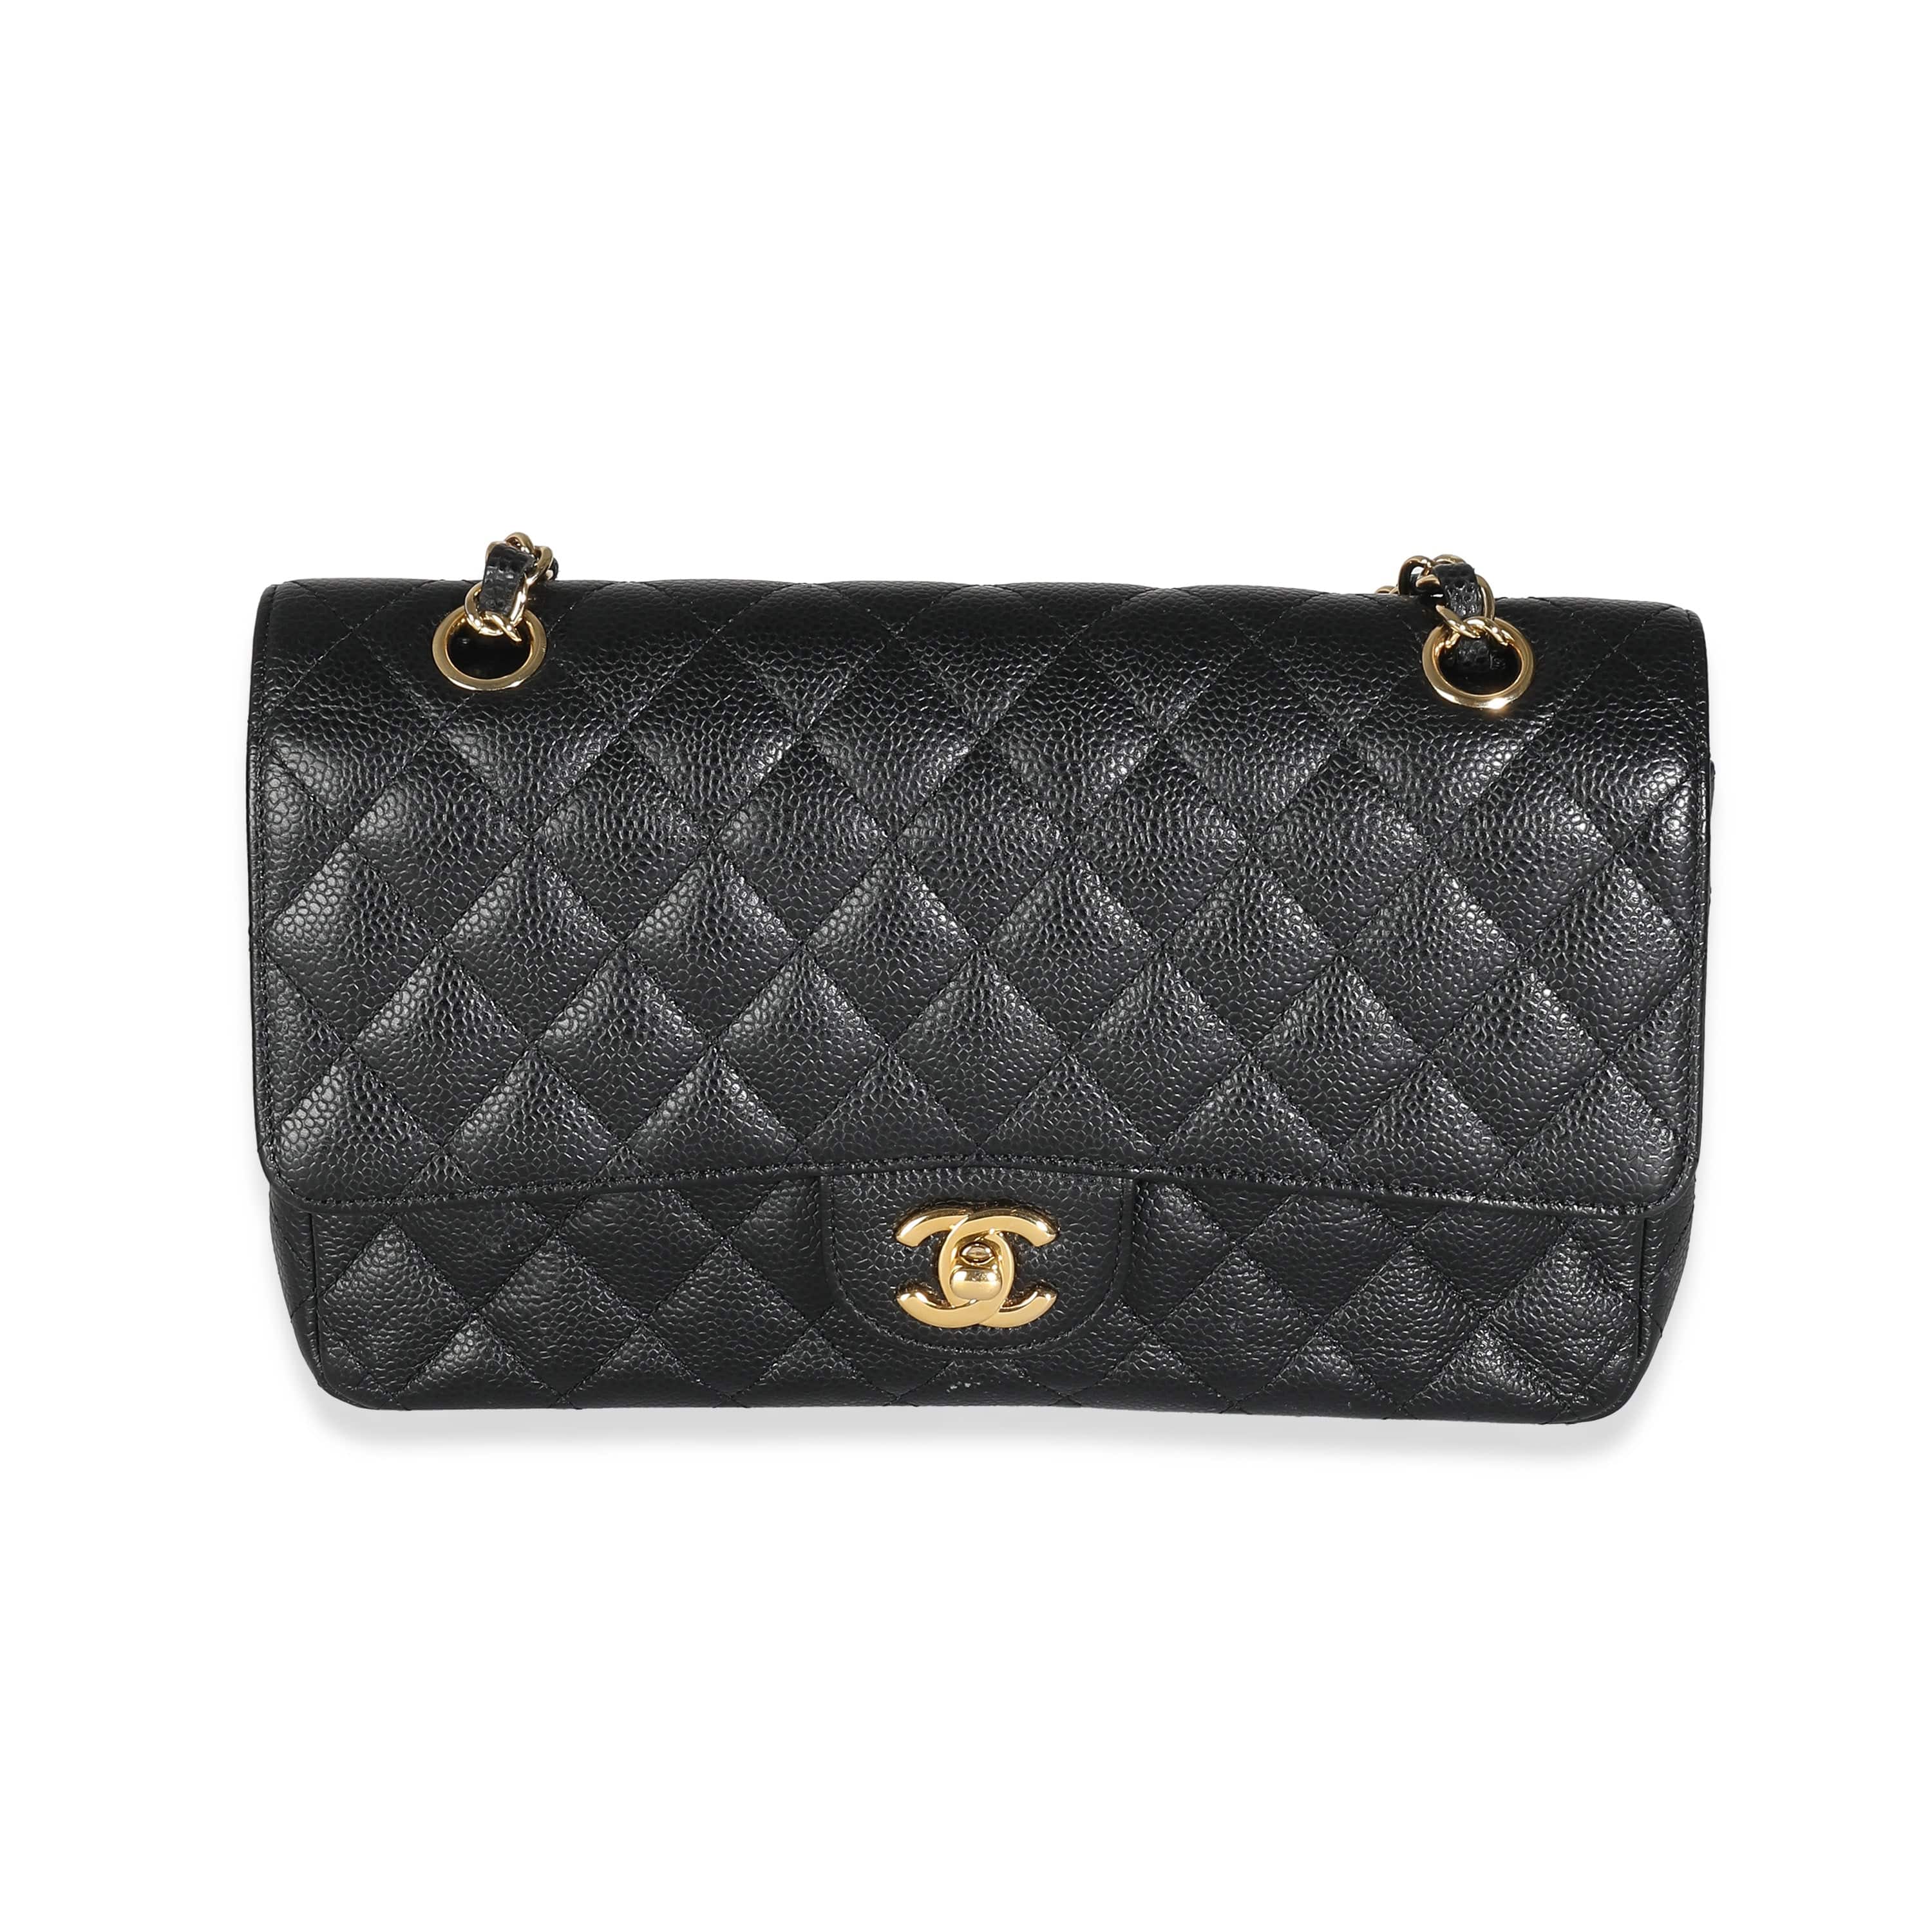 Chanel Chanel Black Quilted Caviar Medium Classic Double Flap Bag